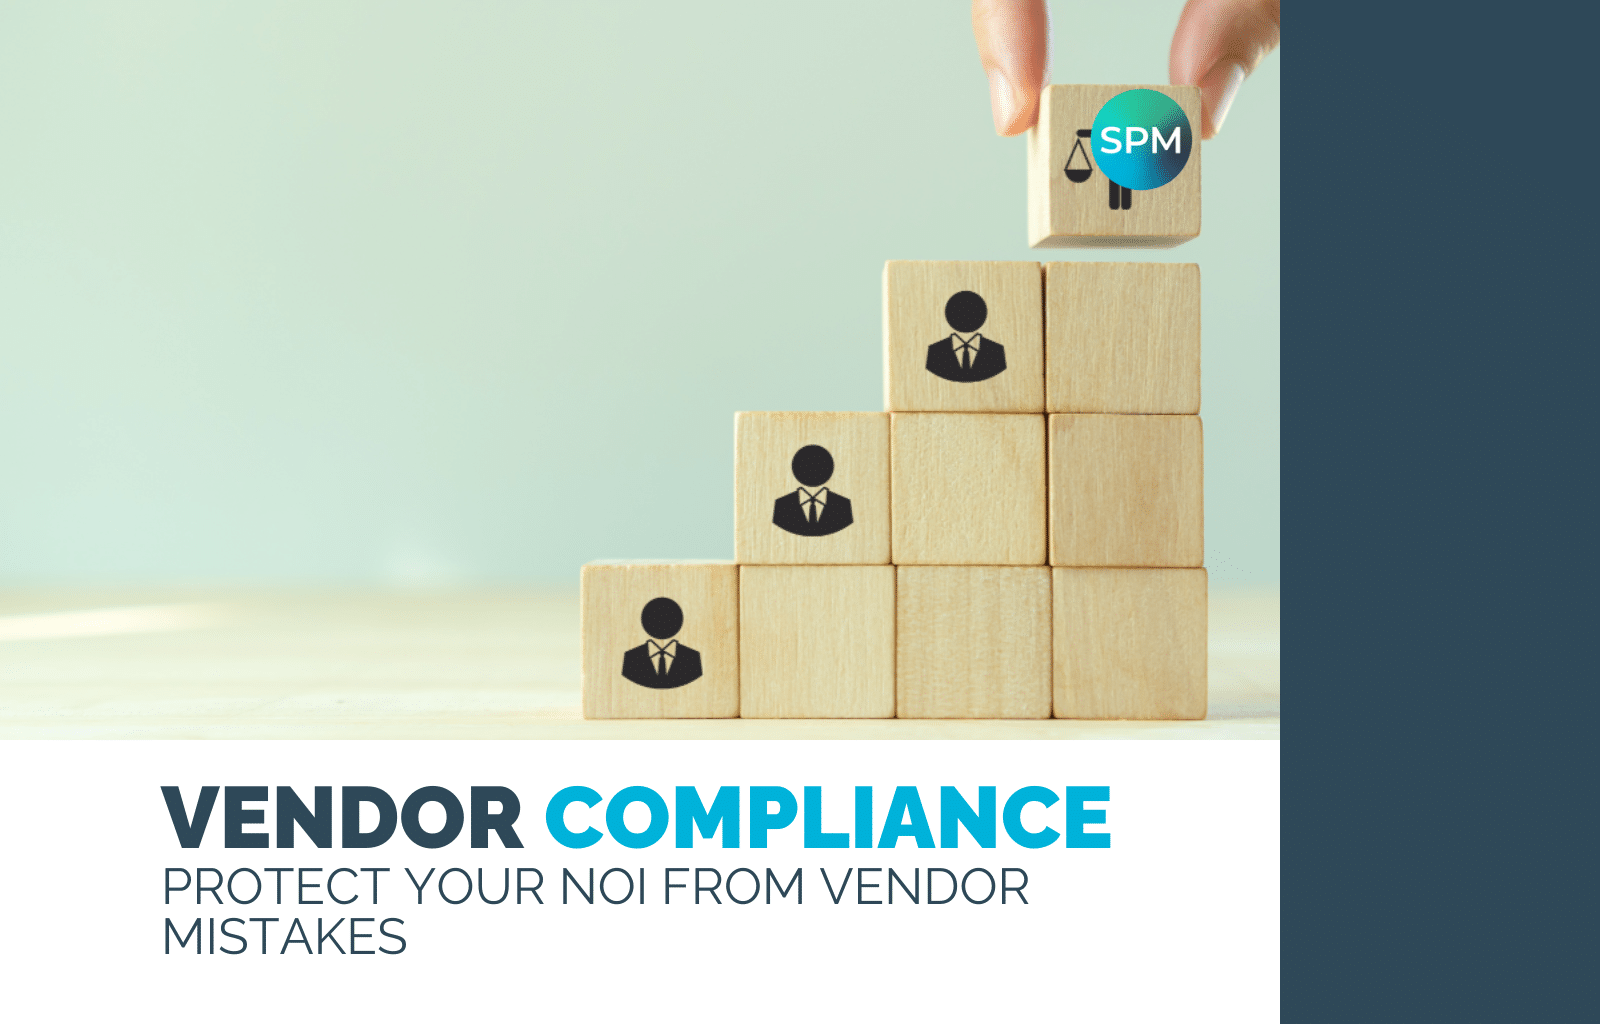 Vendor Compliance - Protect Your NOI From Vendor Mistakes